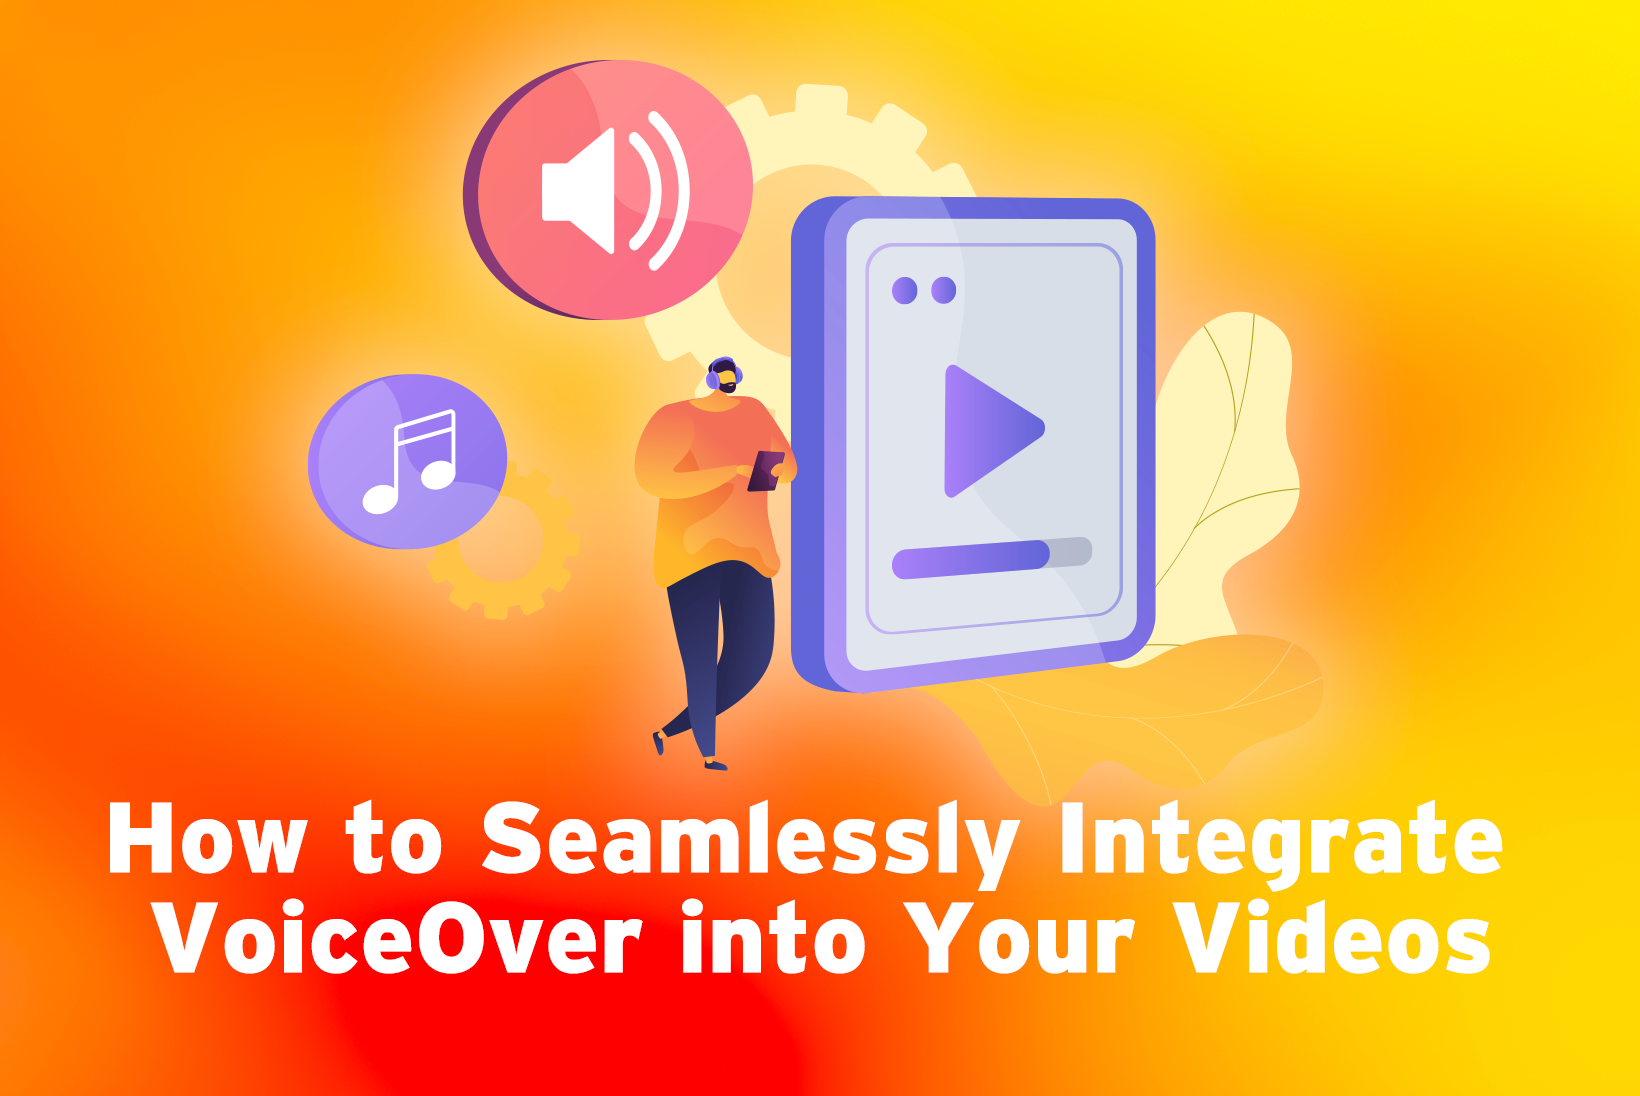 Integrate VoiceOver into Your Videos_